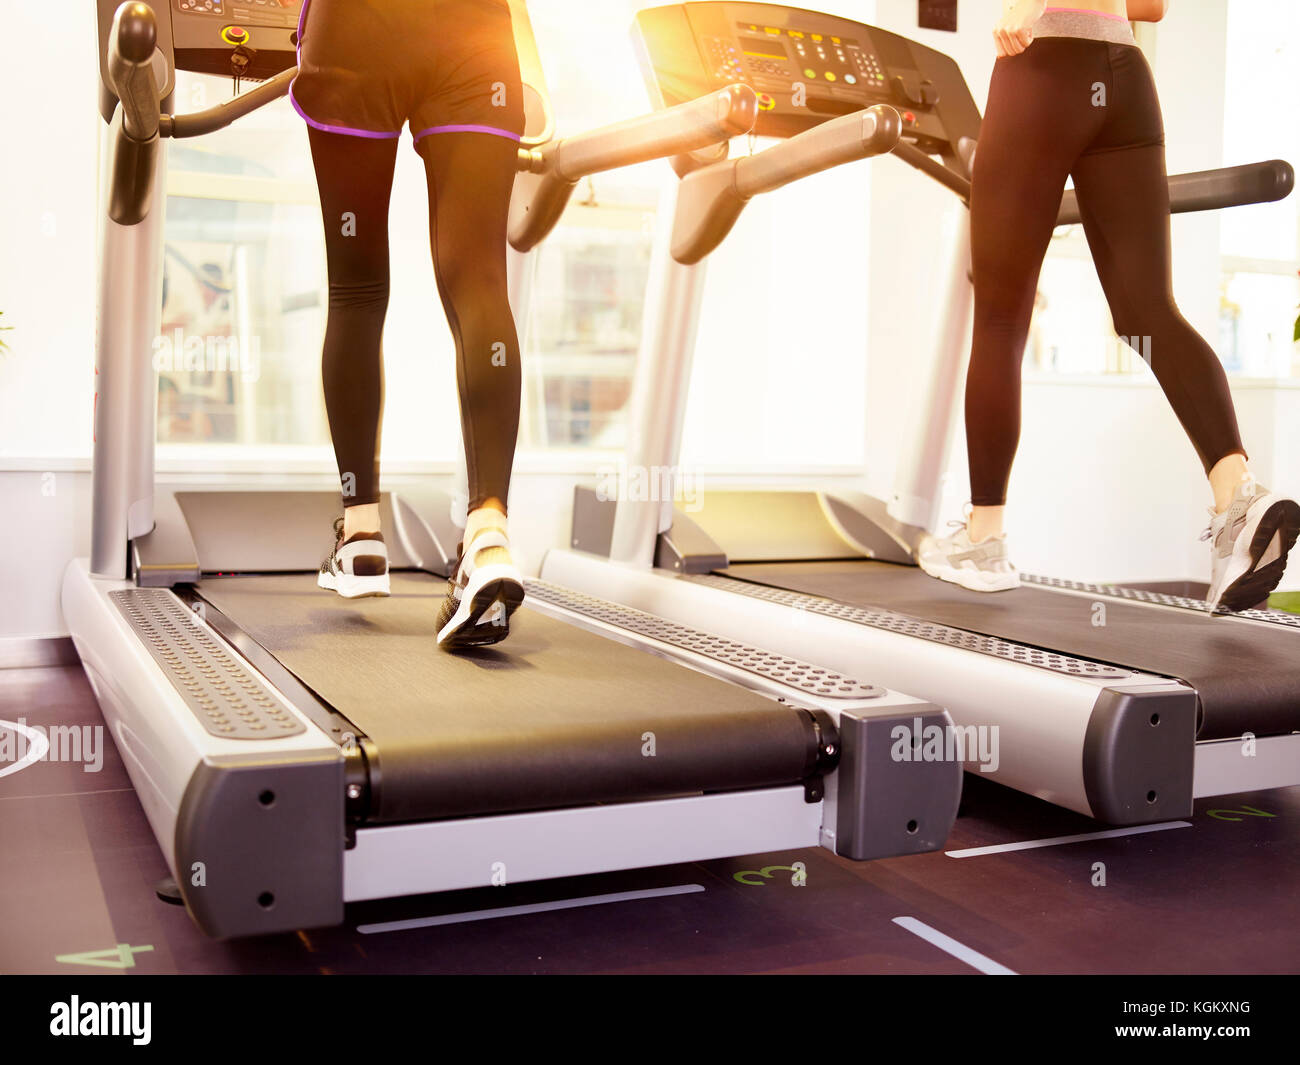 two young women running on treadmill in gym. Stock Photo